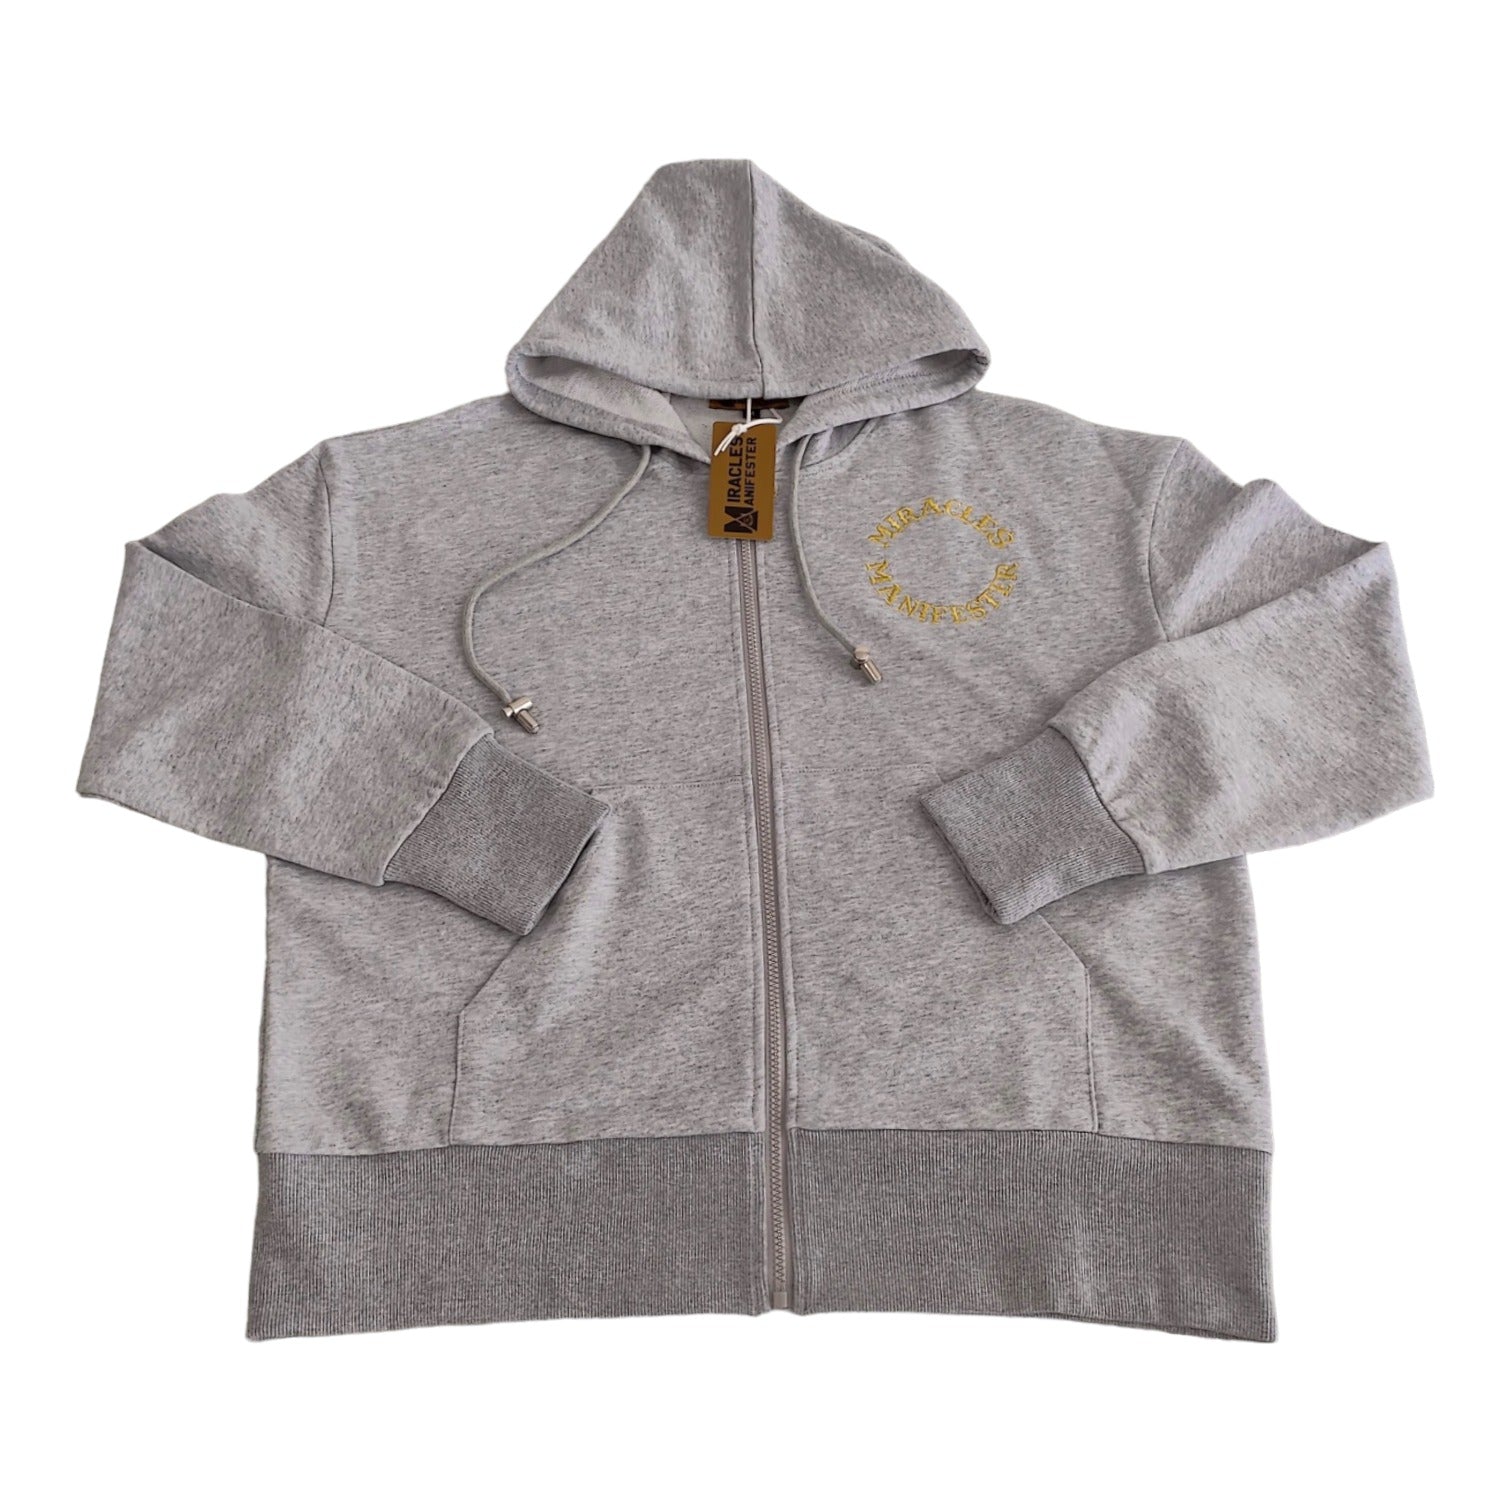 Miracles Manifester Embroidered Zip Hoodie - Light Grey